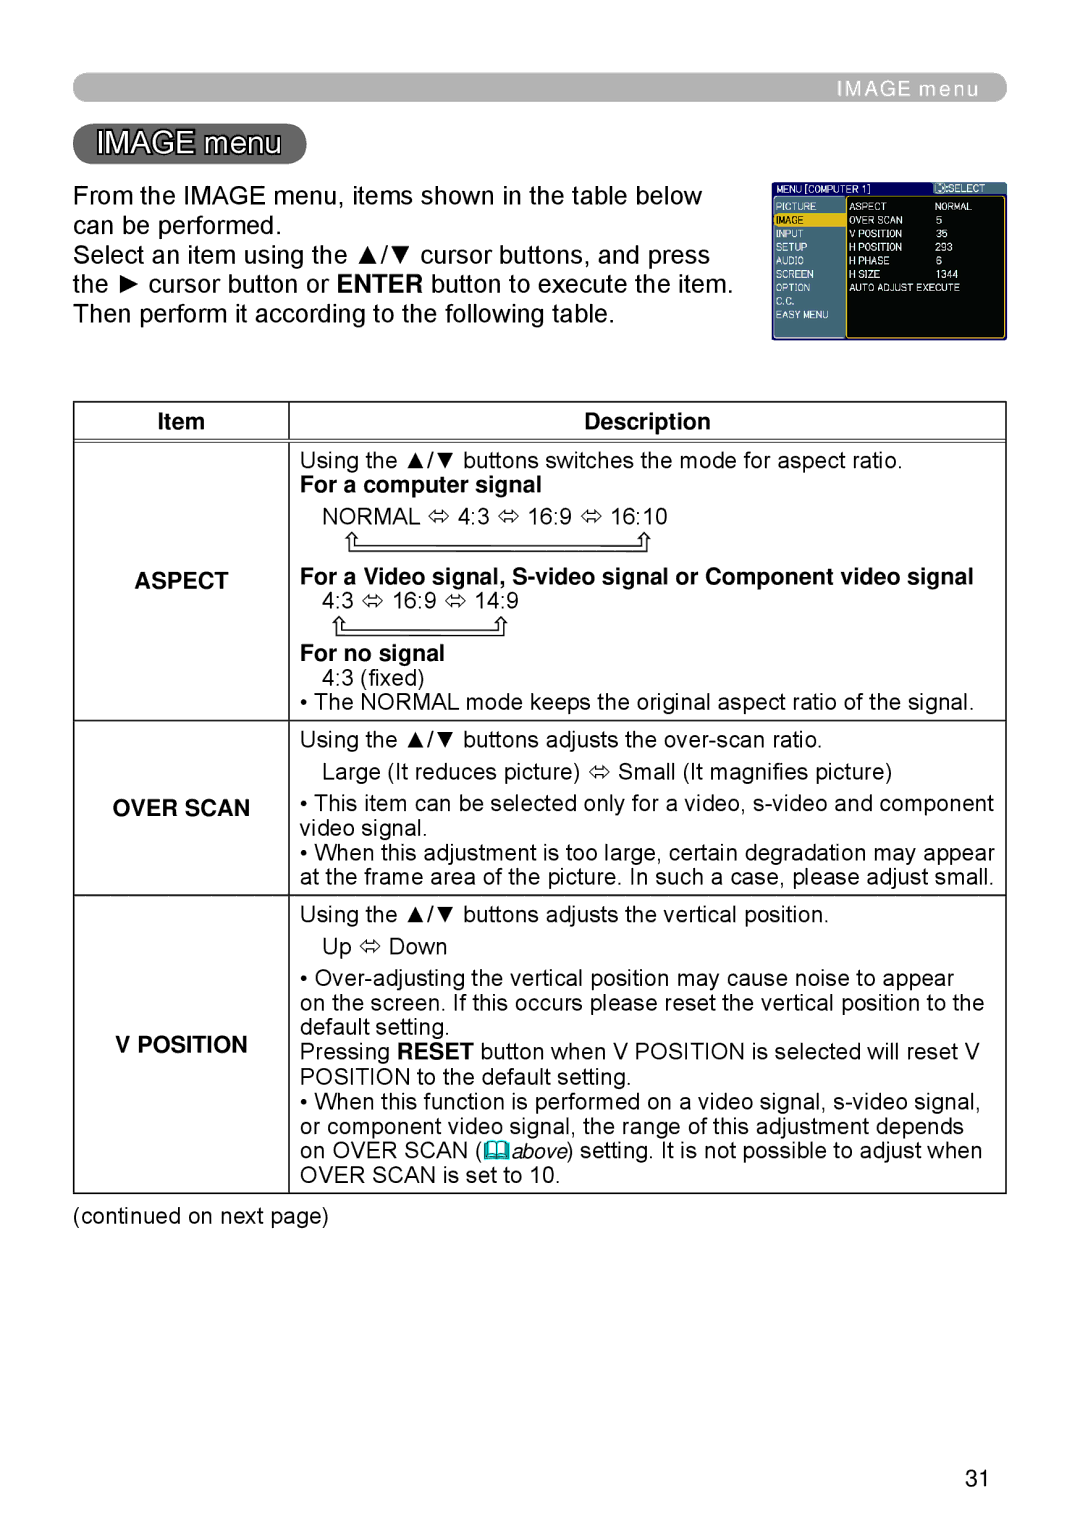 Apple ED-A101, ED-A111 manual Image menu, For a computer signal, For no signal, Over Scan, Position 